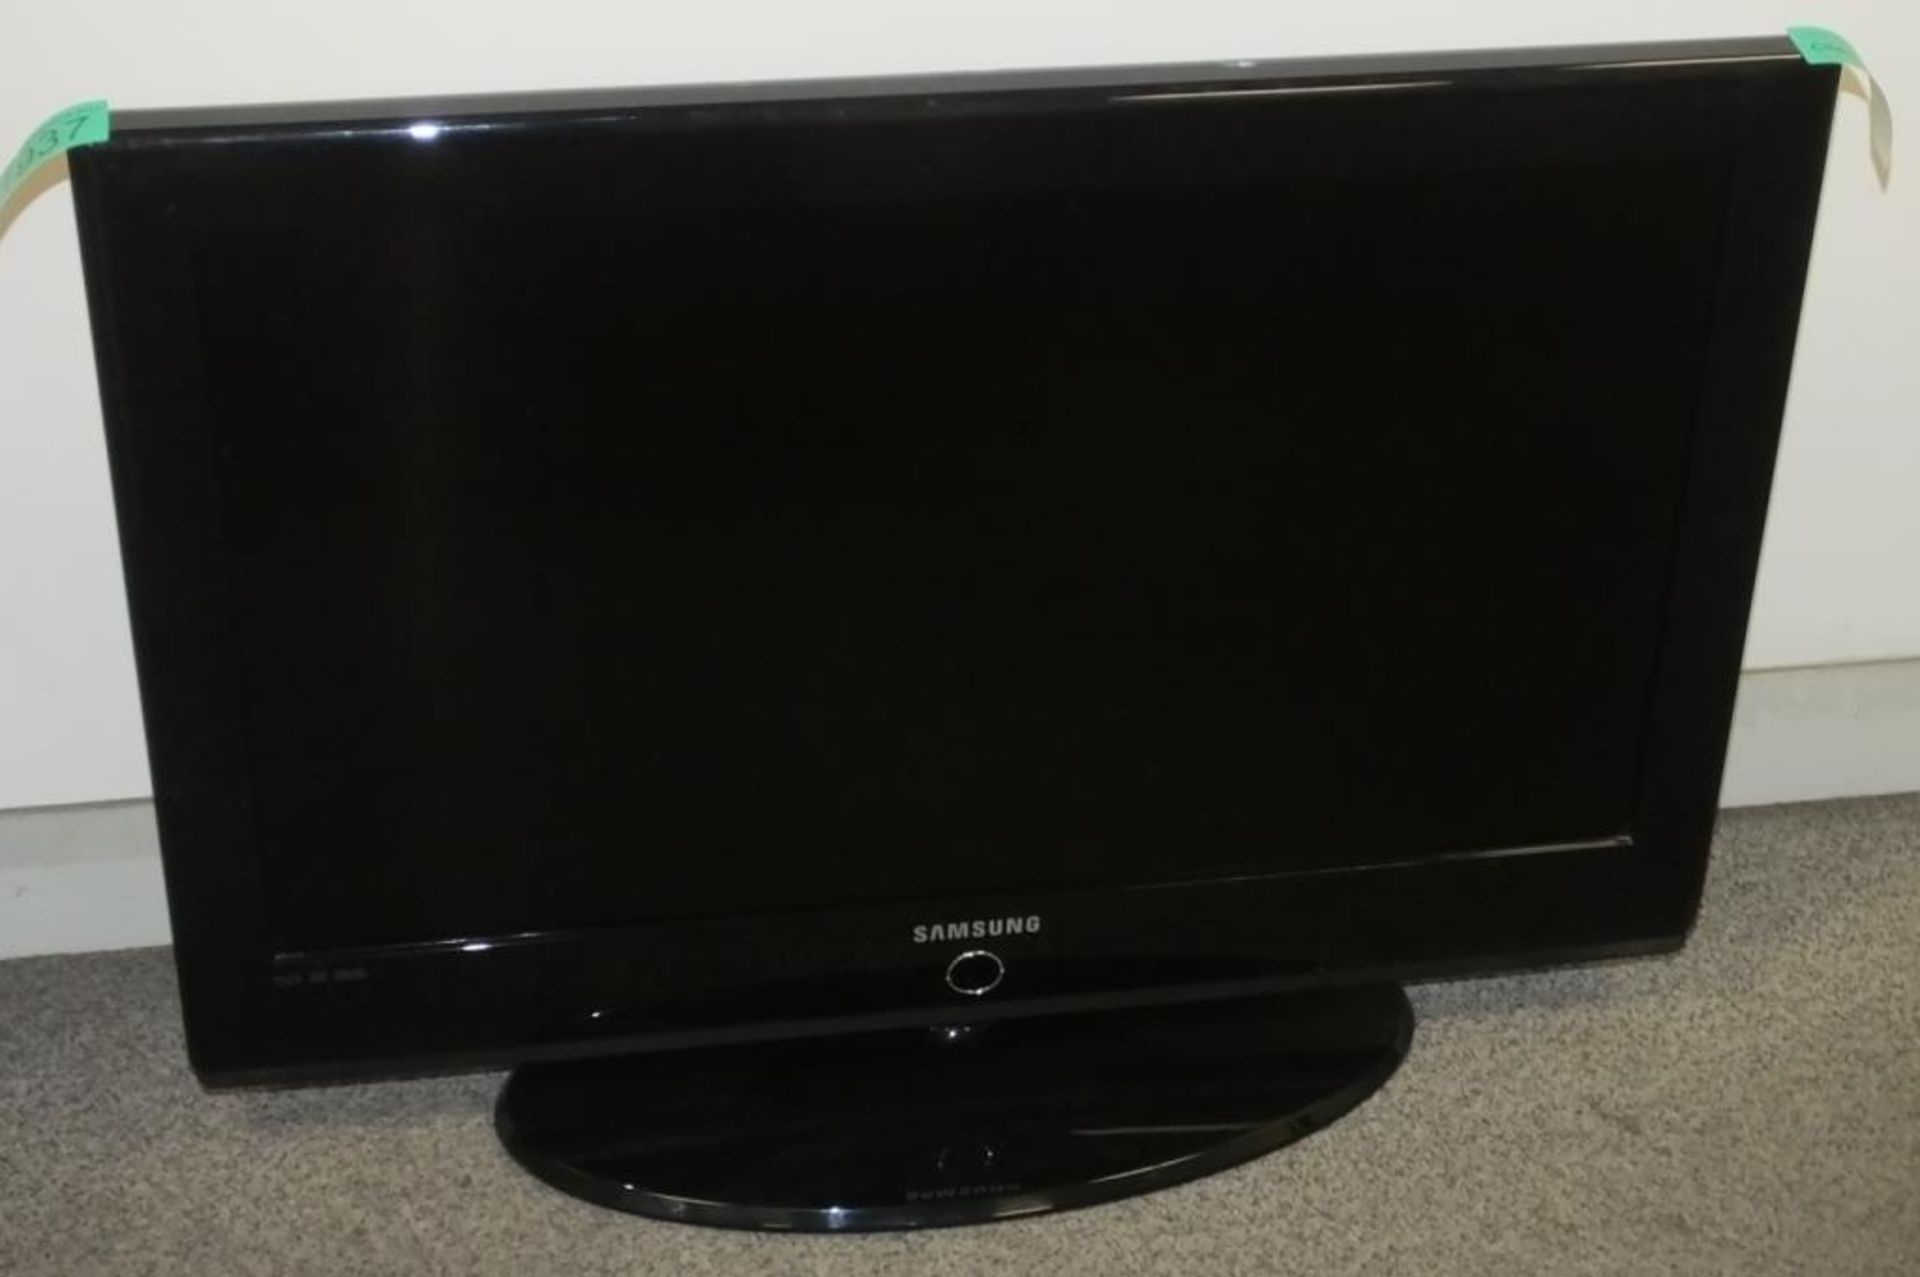 Samsung 32 inch flat screen television - Model LE32A436T1D - Type LE32A436 - AC 220-240V